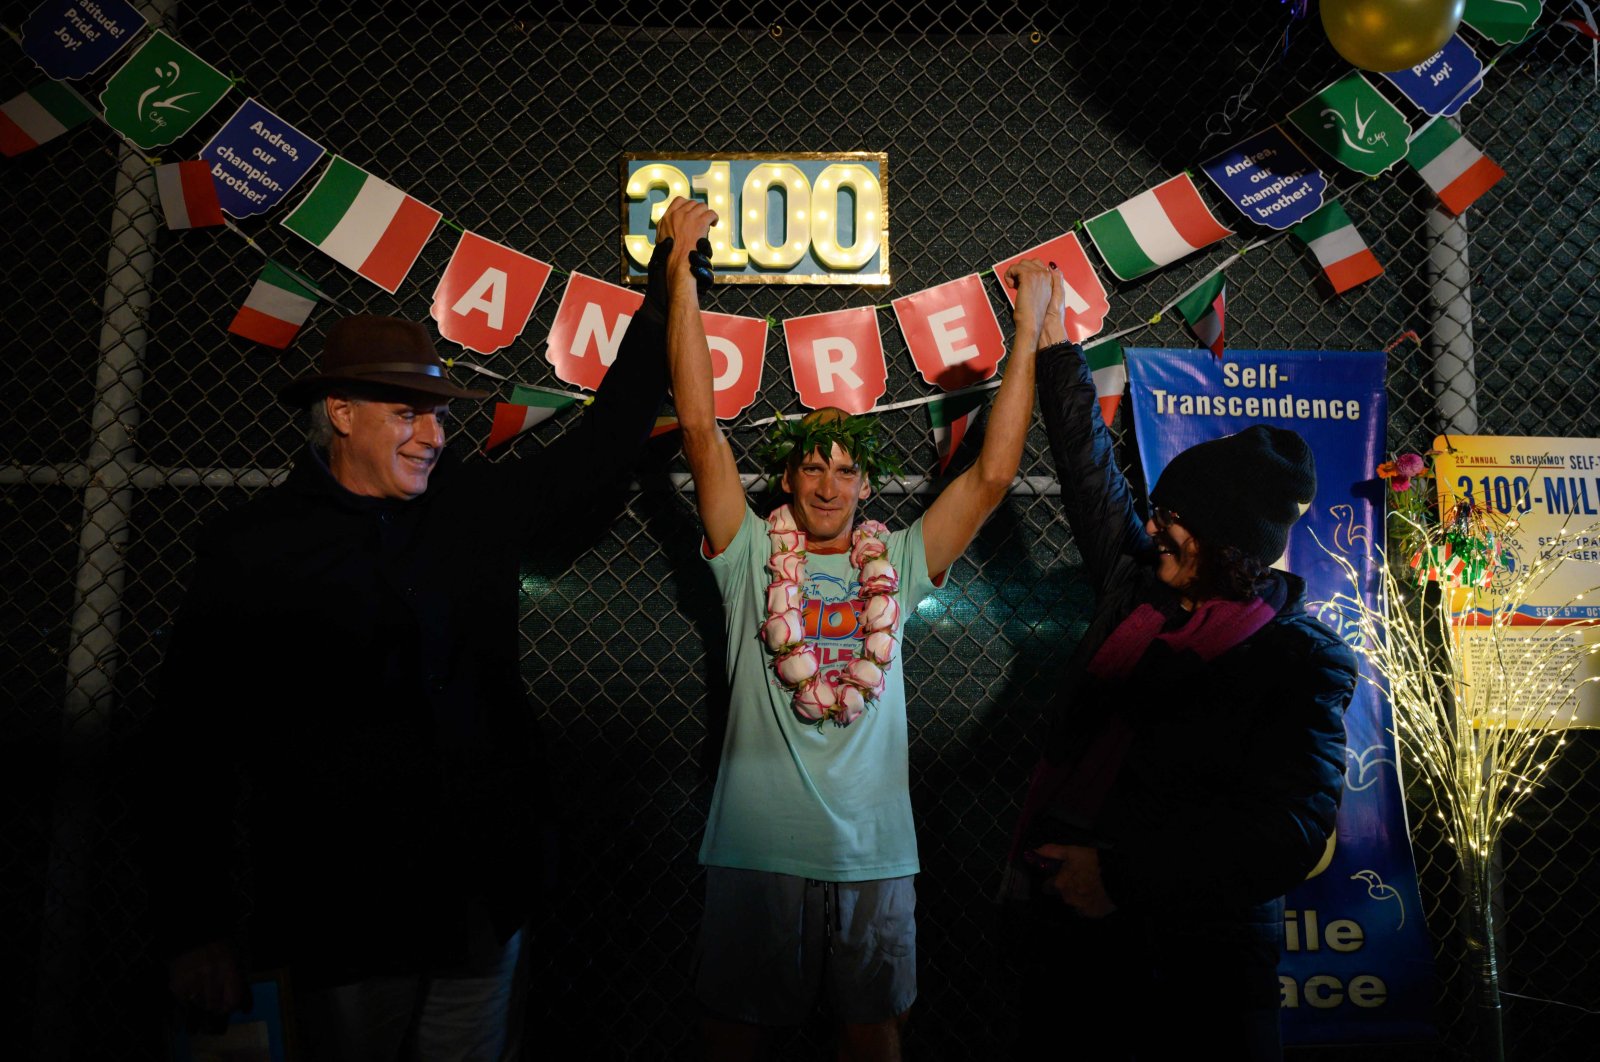 Italy's Andrea Marcato poses after winning the "Self-Transcendence 3100 Mile Race," the world's longest certified foot race, in Queens, New York, U.S., Oct. 17, 2021. (AFP Photo)